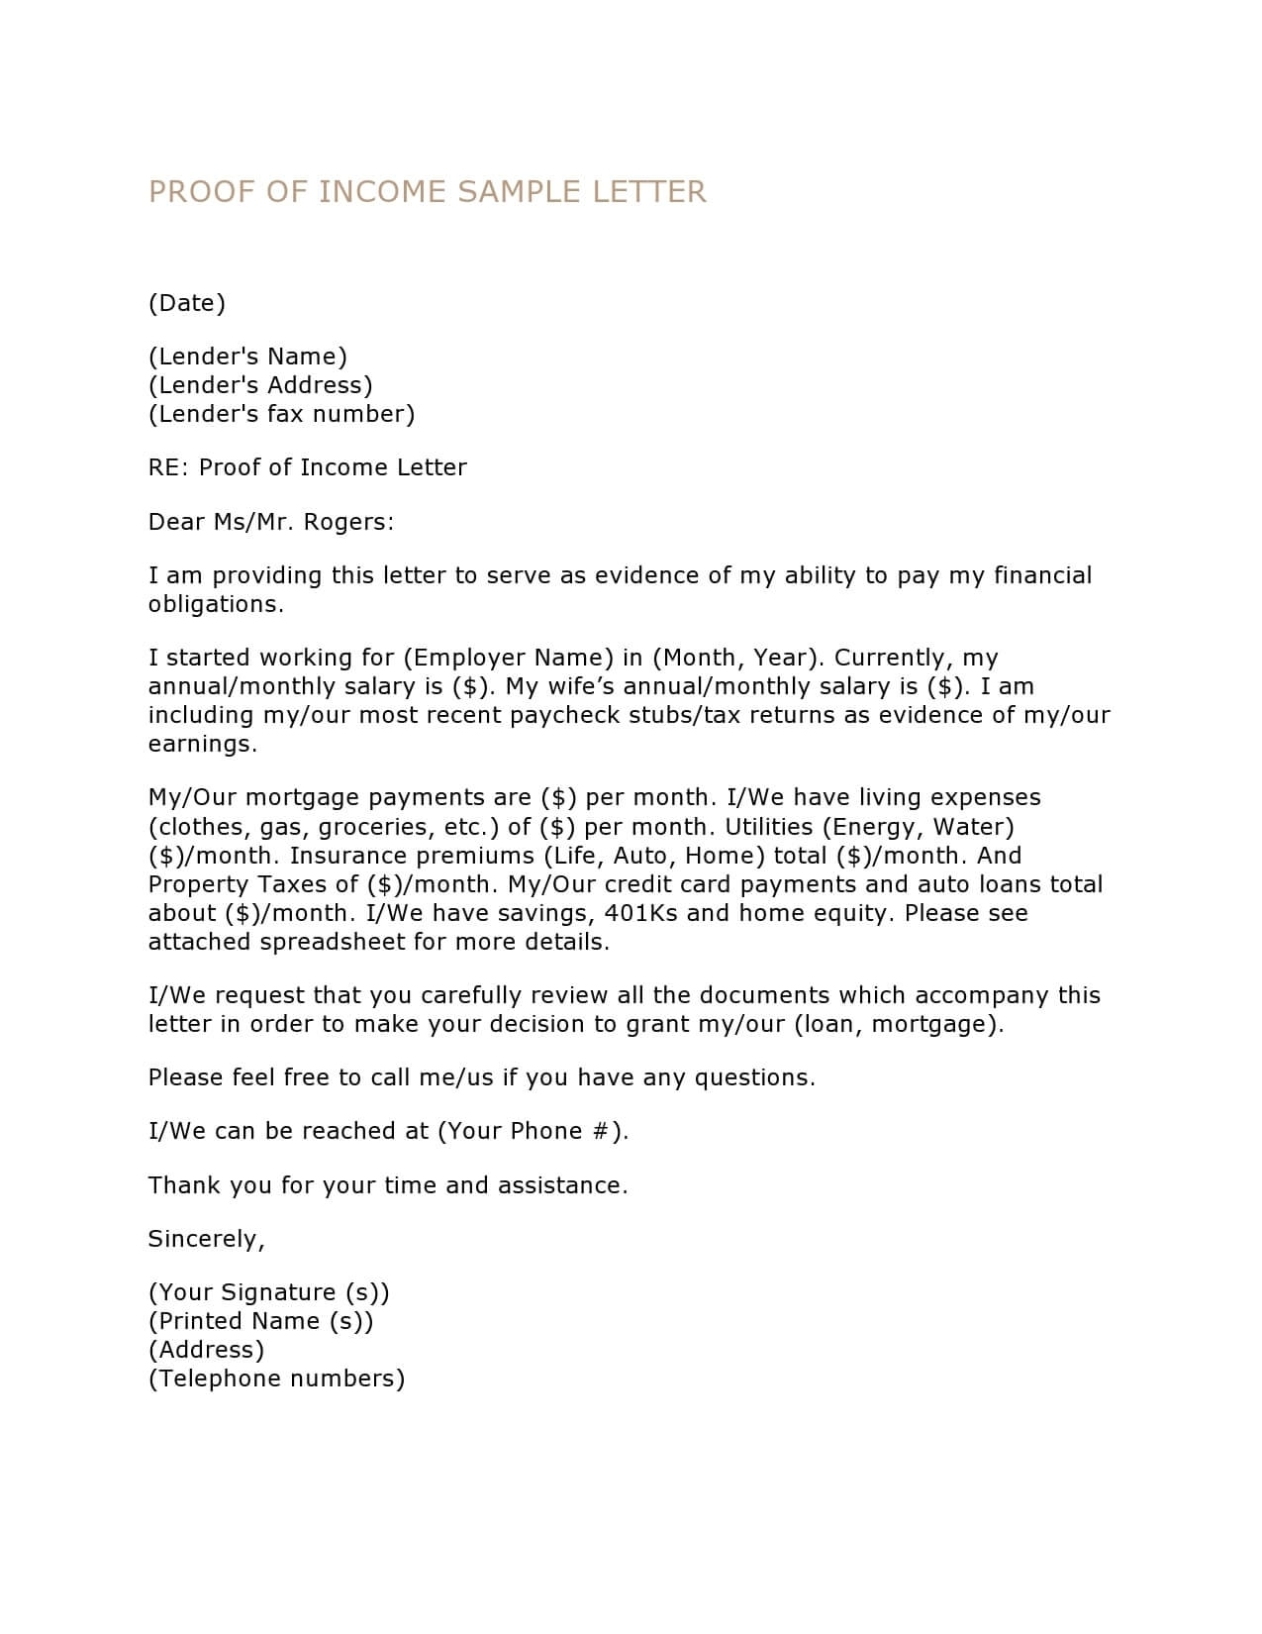 Proof Of Income Sample Letter Template | Printable With Regard To Proof Of Income Letter Template